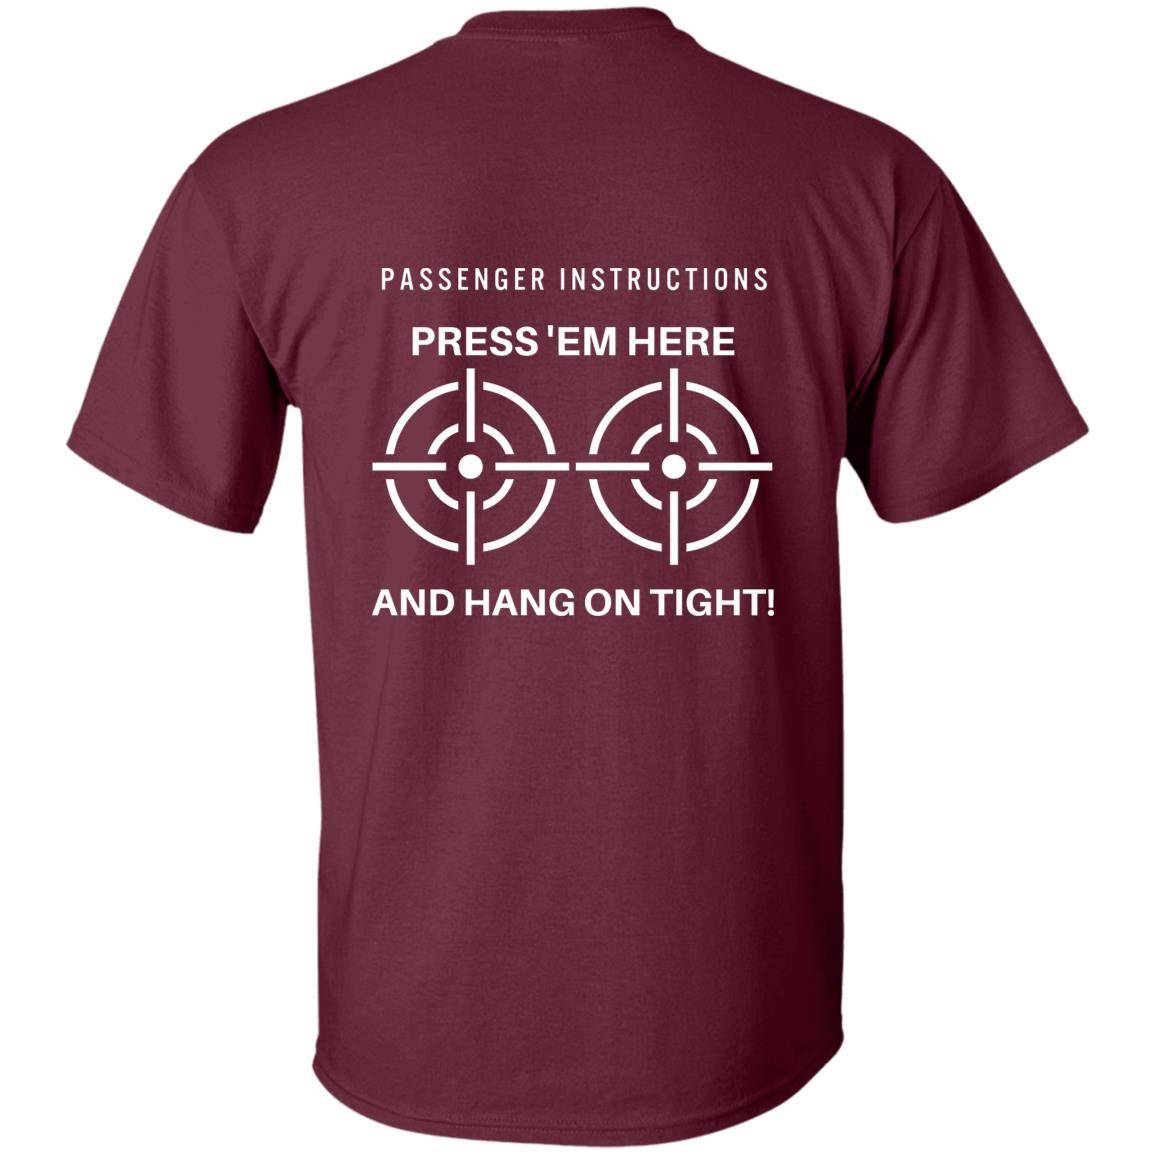 Back of the maroon Passenger Instruction heavyweight classic unisex t-shirt in 100% cotton. The front is blank; the back has two bulls eyes printed and reads "Press 'em here and hang on tight!"